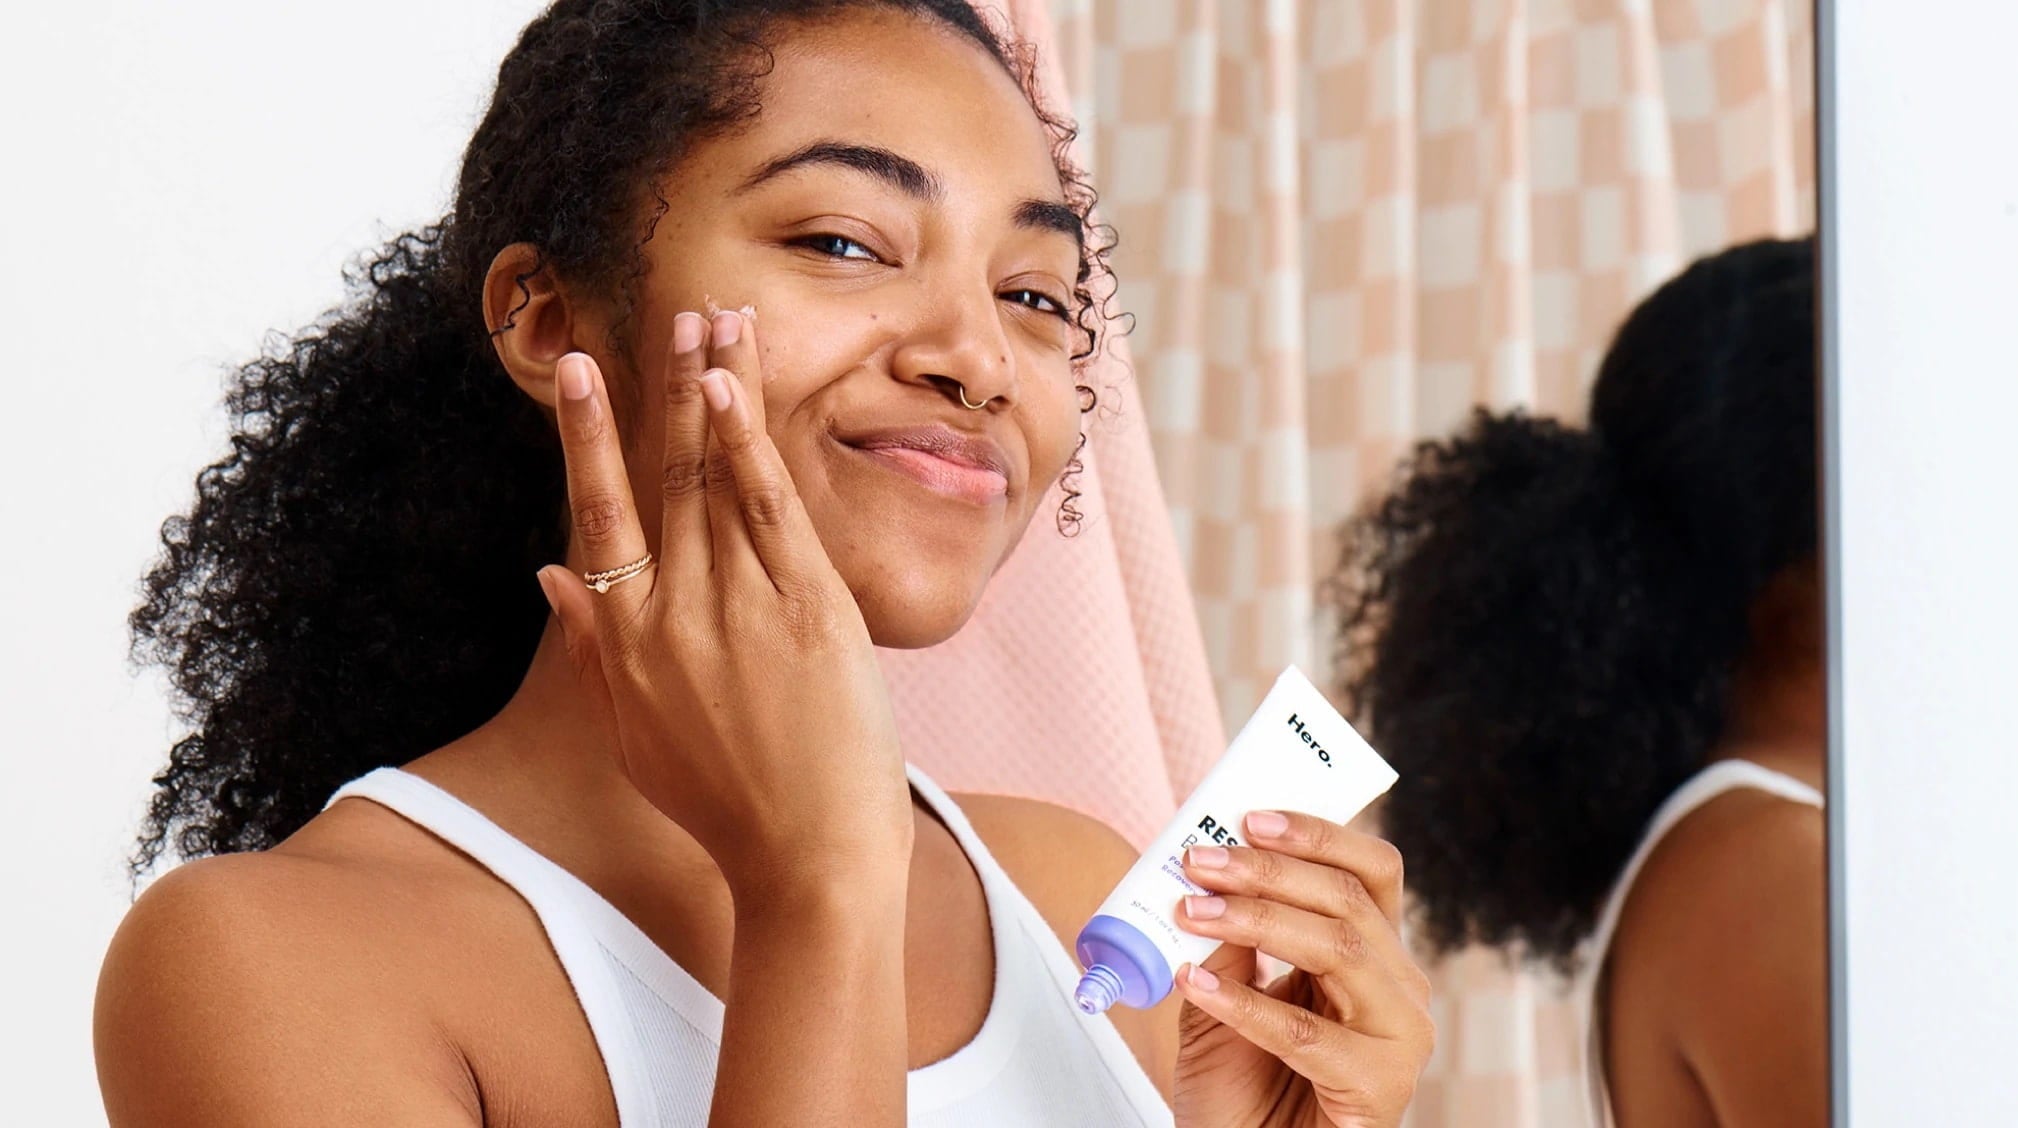 What Is Slugging? And Should You Try the Viral K-Beauty Skincare Trend?